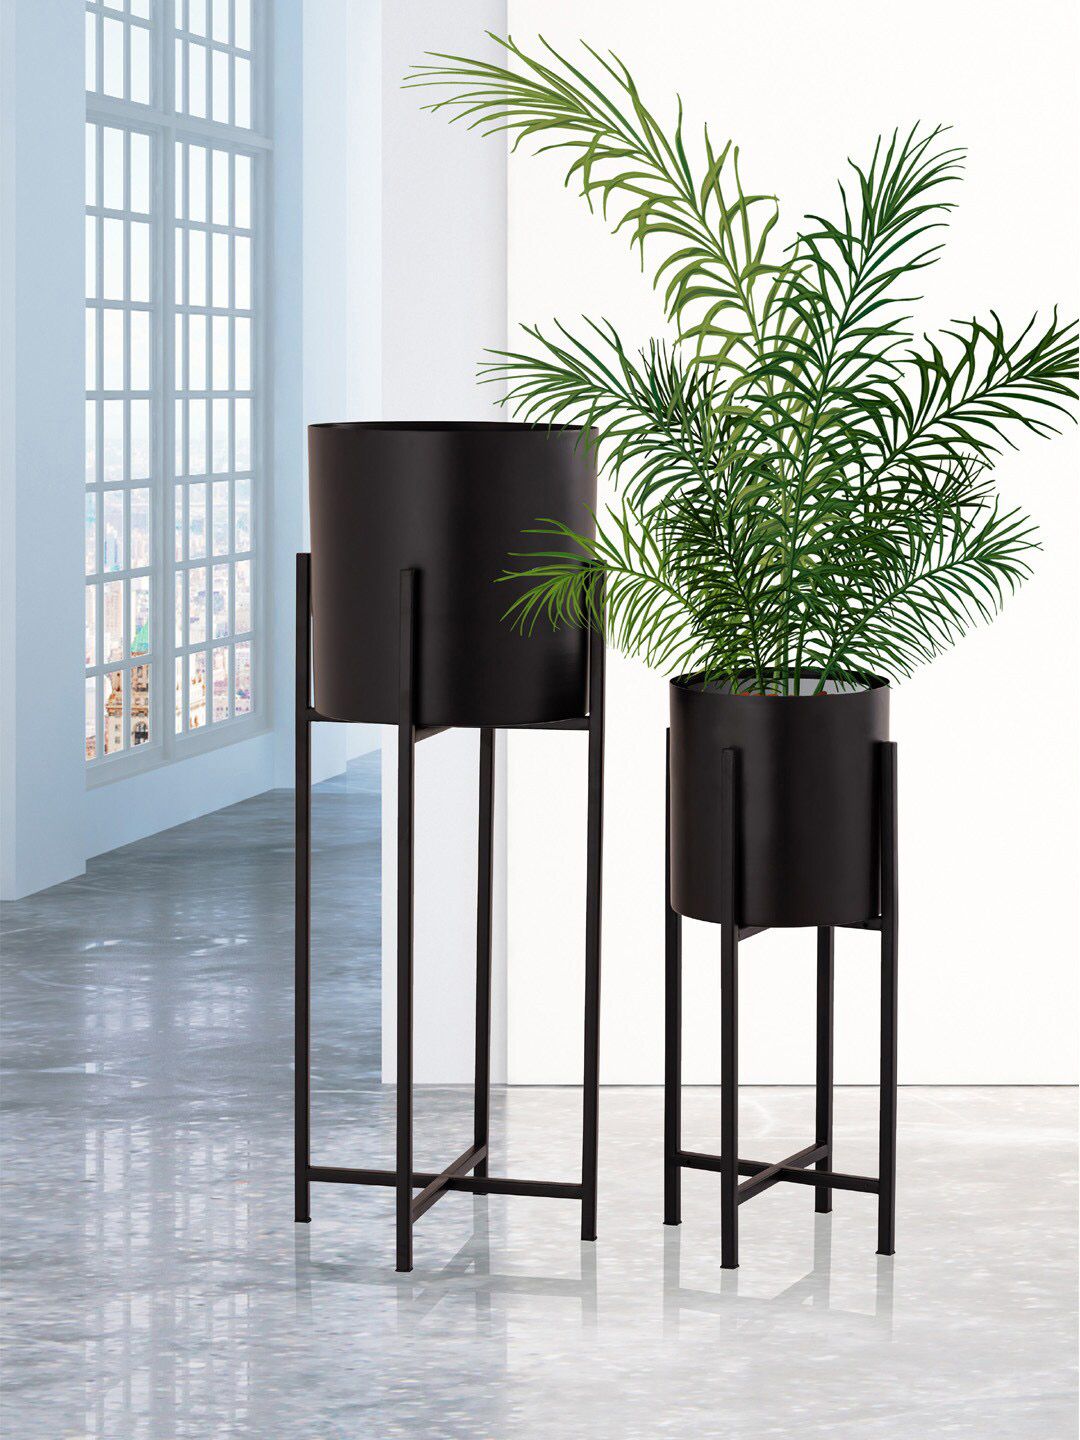 Aapno Rajasthan Black Set of 2 Solid Planters with Stand Price in India